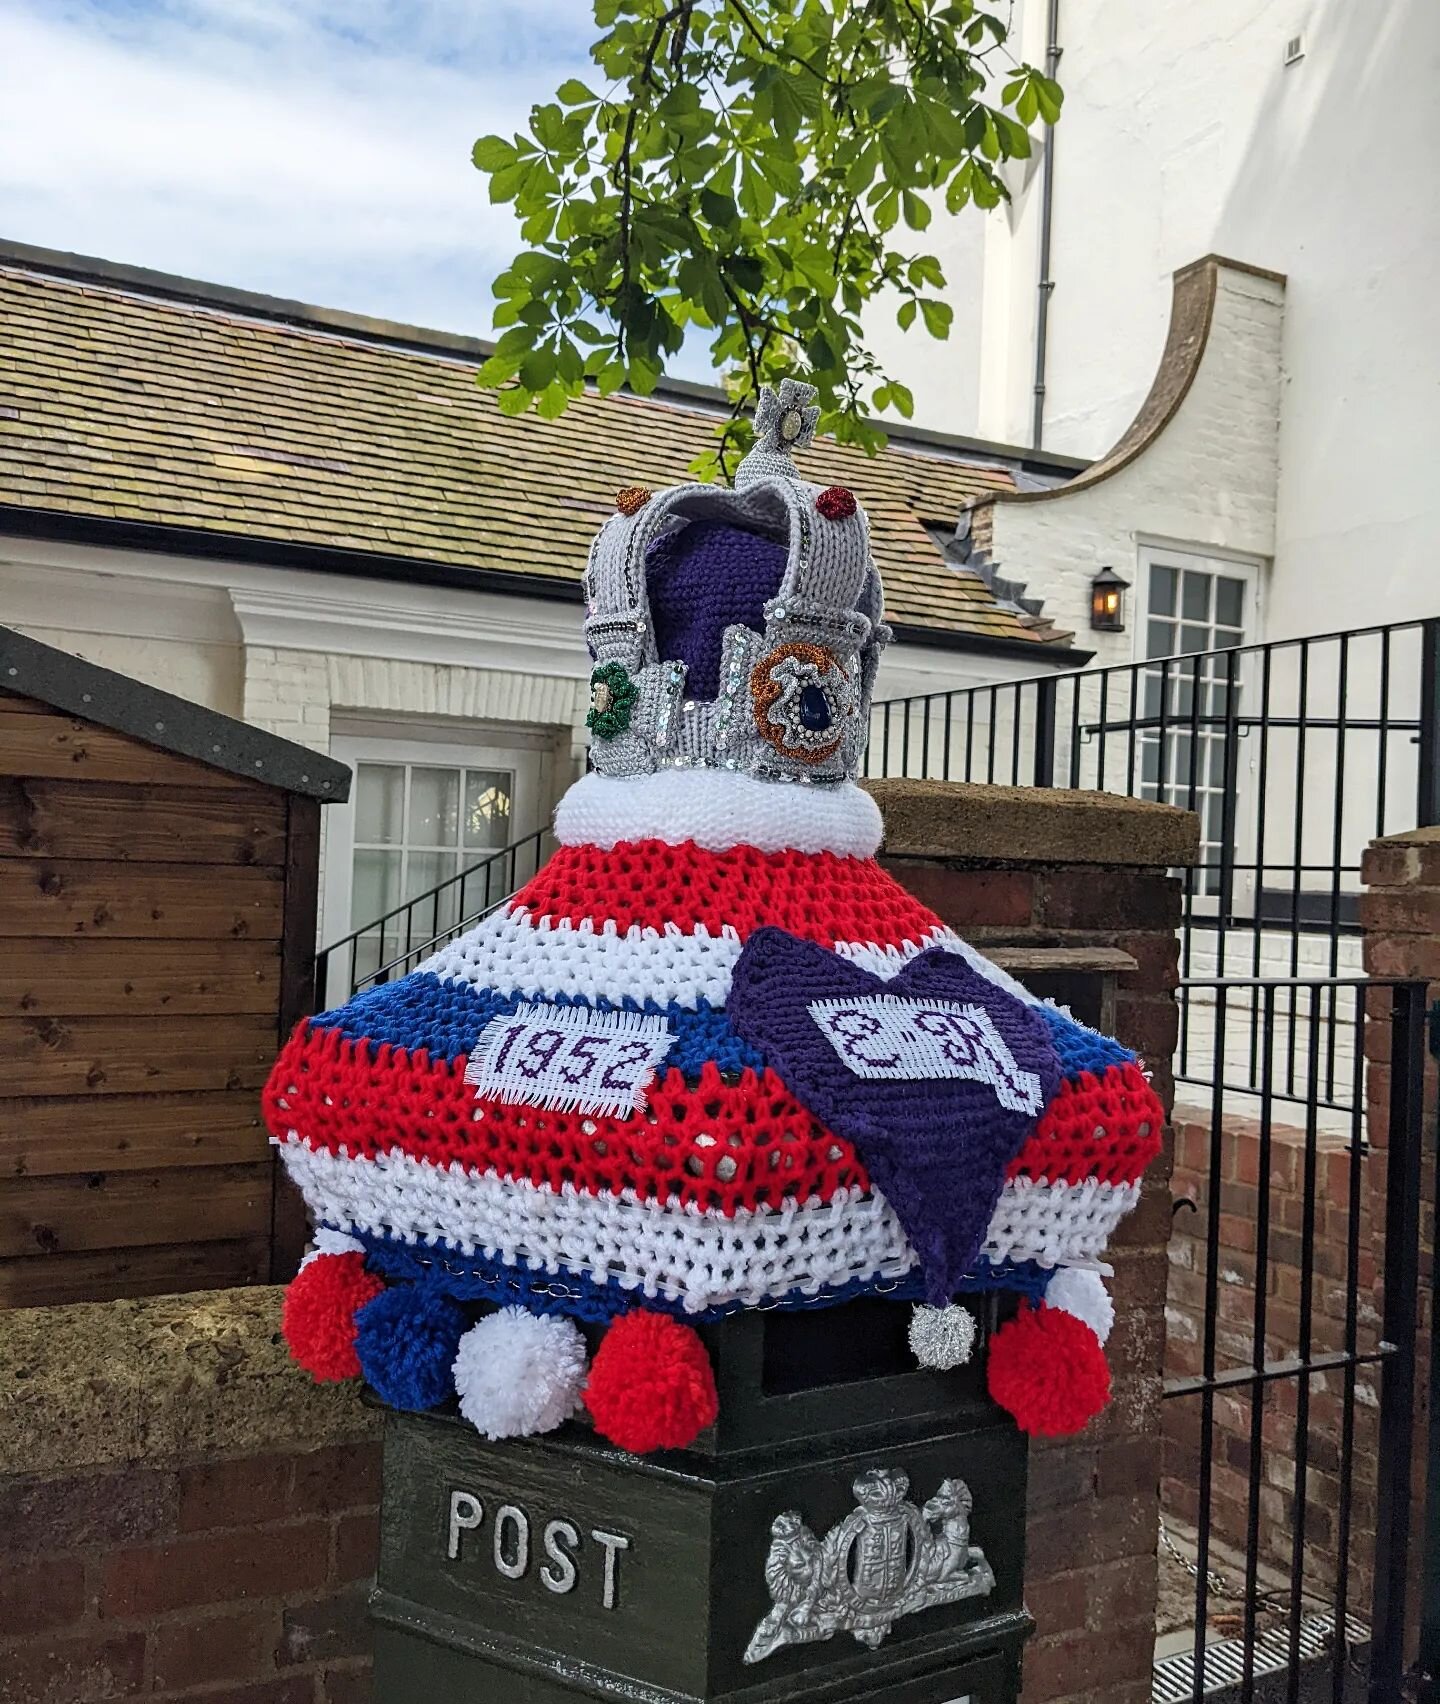 Happy jubilee!! How amazing is this crochet yarn bomb on our local postbox 😍😍😍 it was tagged #RandomActsOfCrochetKindness the little crown! So impressed
.
.
.
#thequeenstitch #crochet #yarnbomb #jubilee #uk #platinumjubilee #queenelizabeth